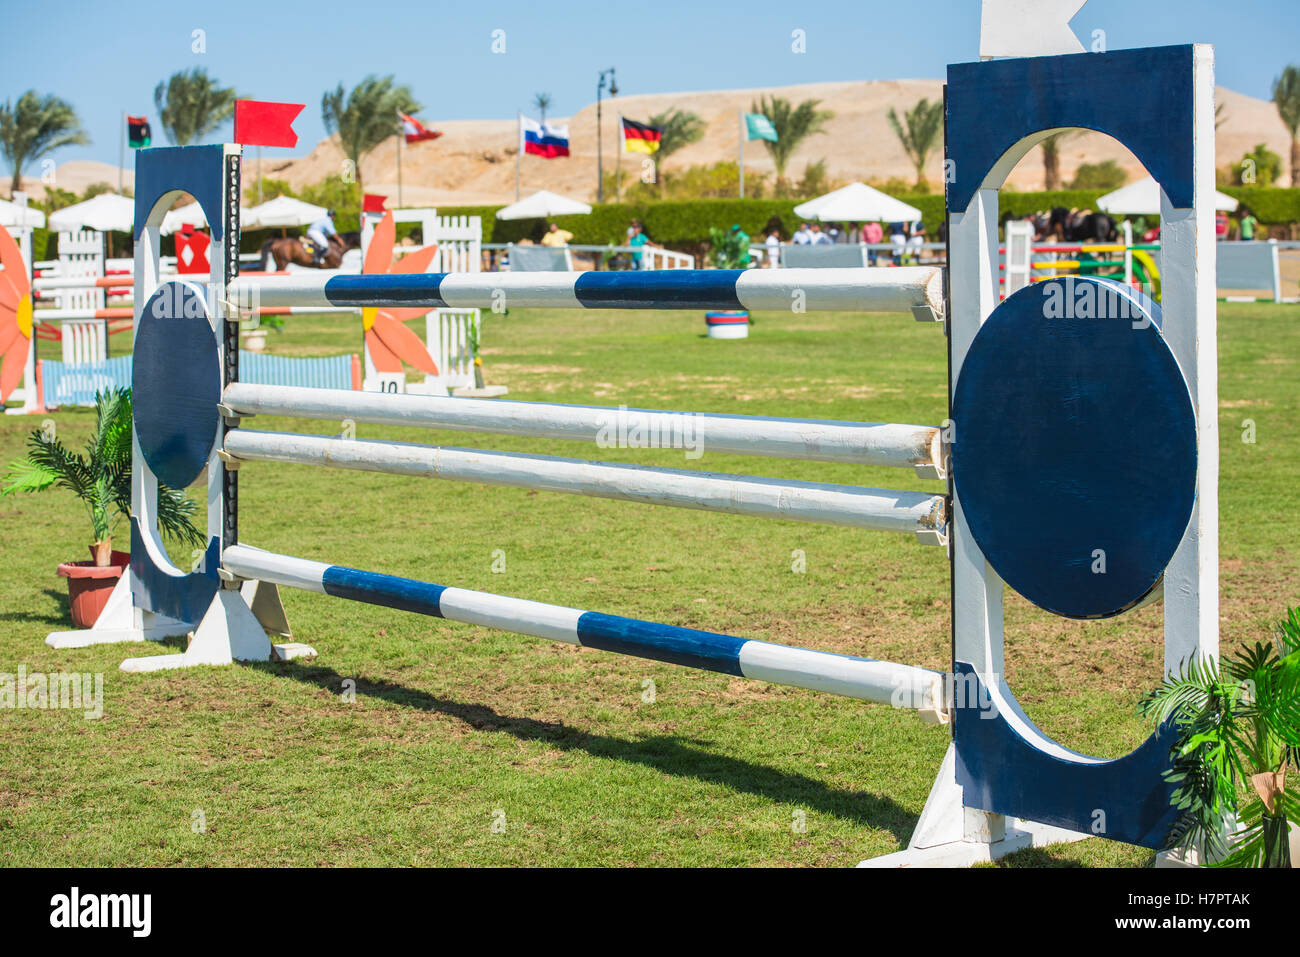 Closeup of a hurdle at an outdoor equestrian showjumping competition event Stock Photo